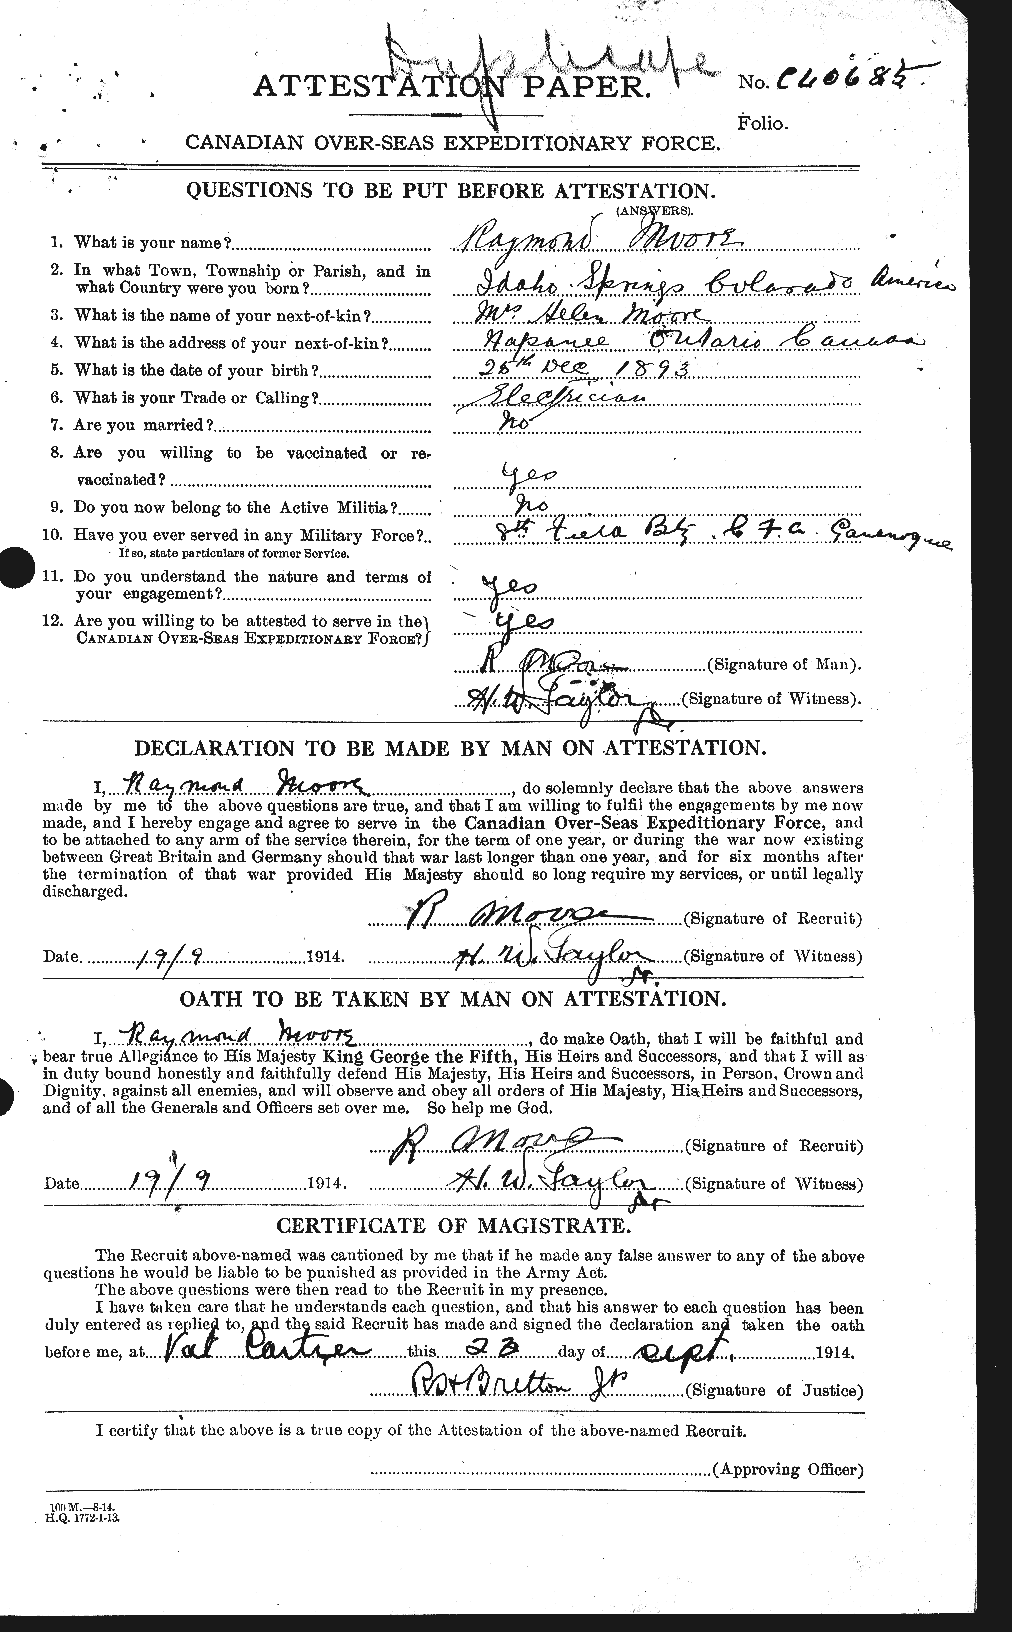 Personnel Records of the First World War - CEF 503517a